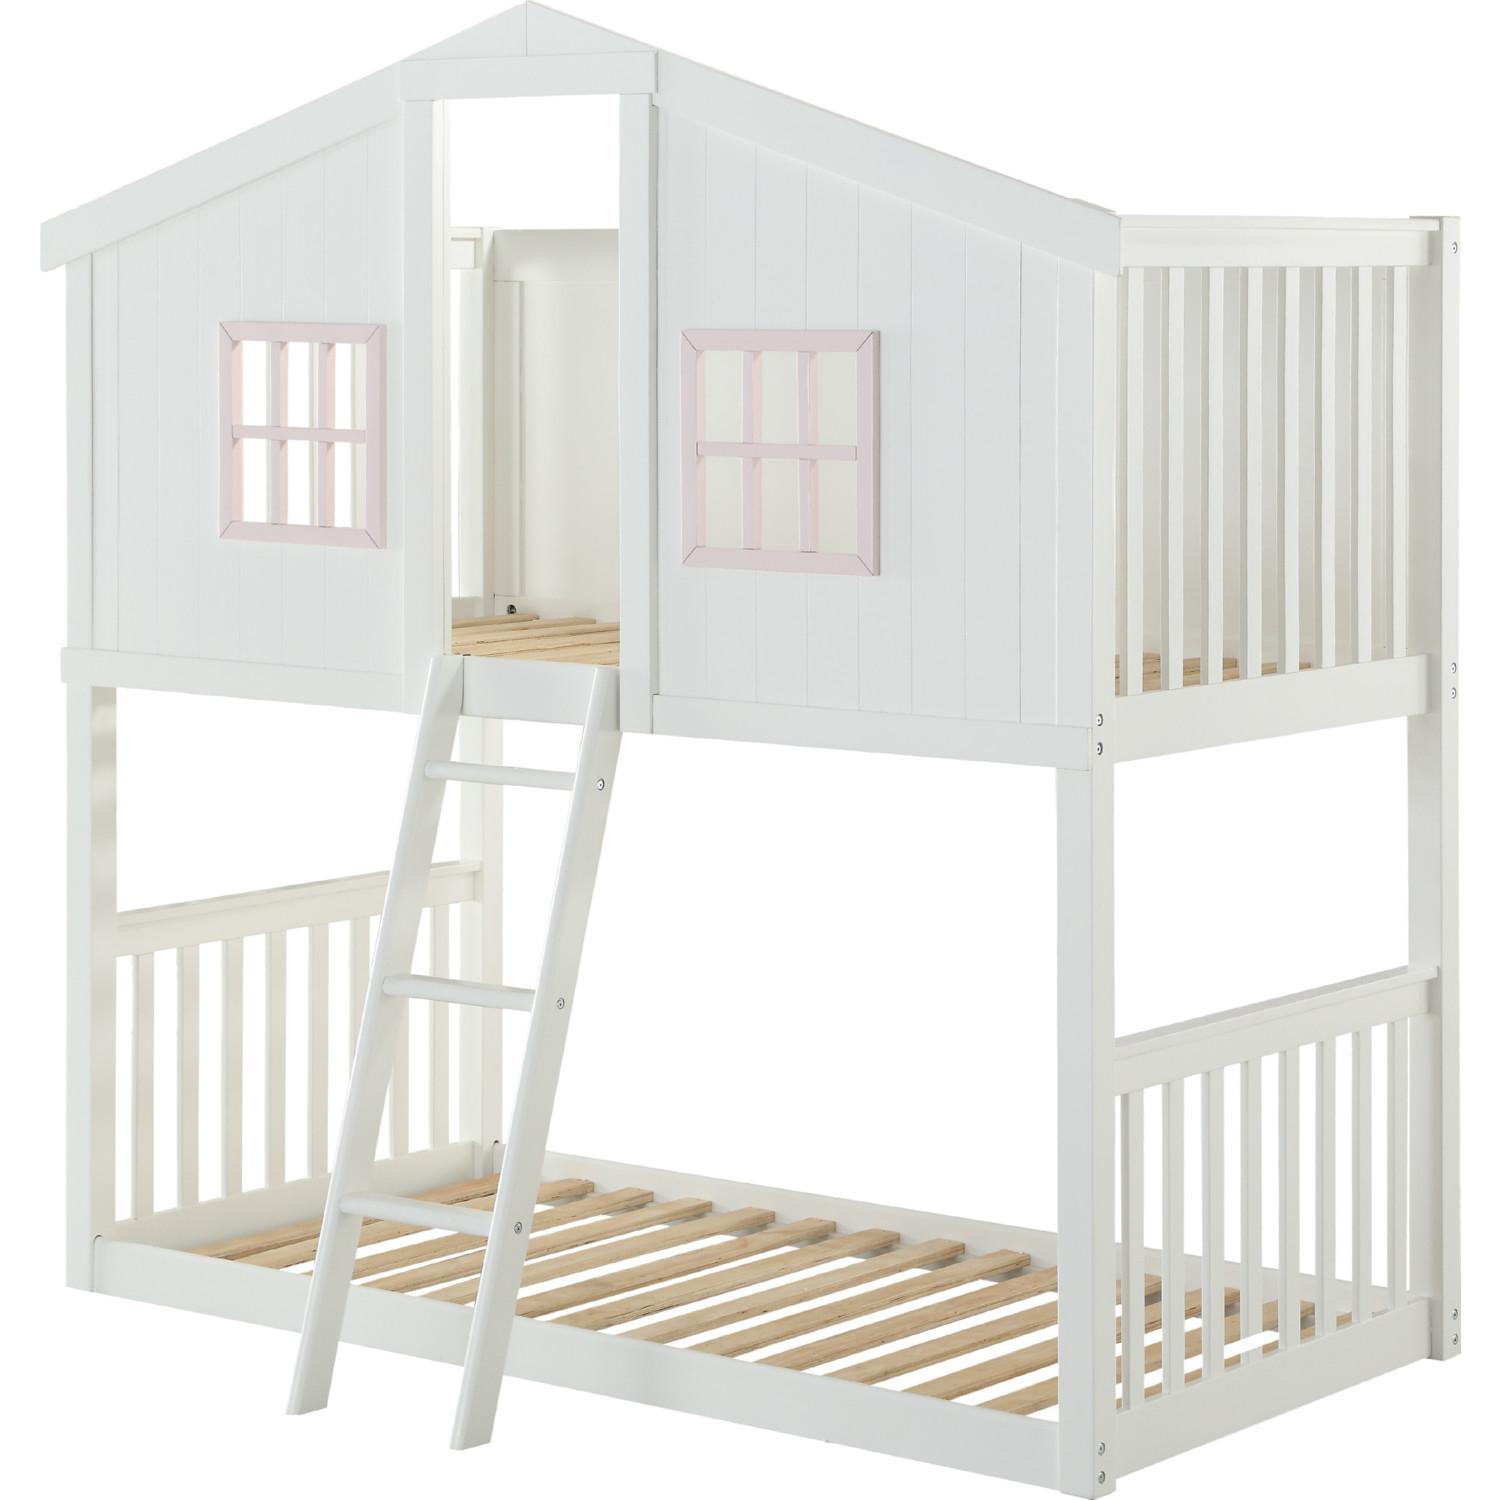 

    
Cottage White & Pink Twin/Twin Bunk Bed by Acme Rohan 37410
